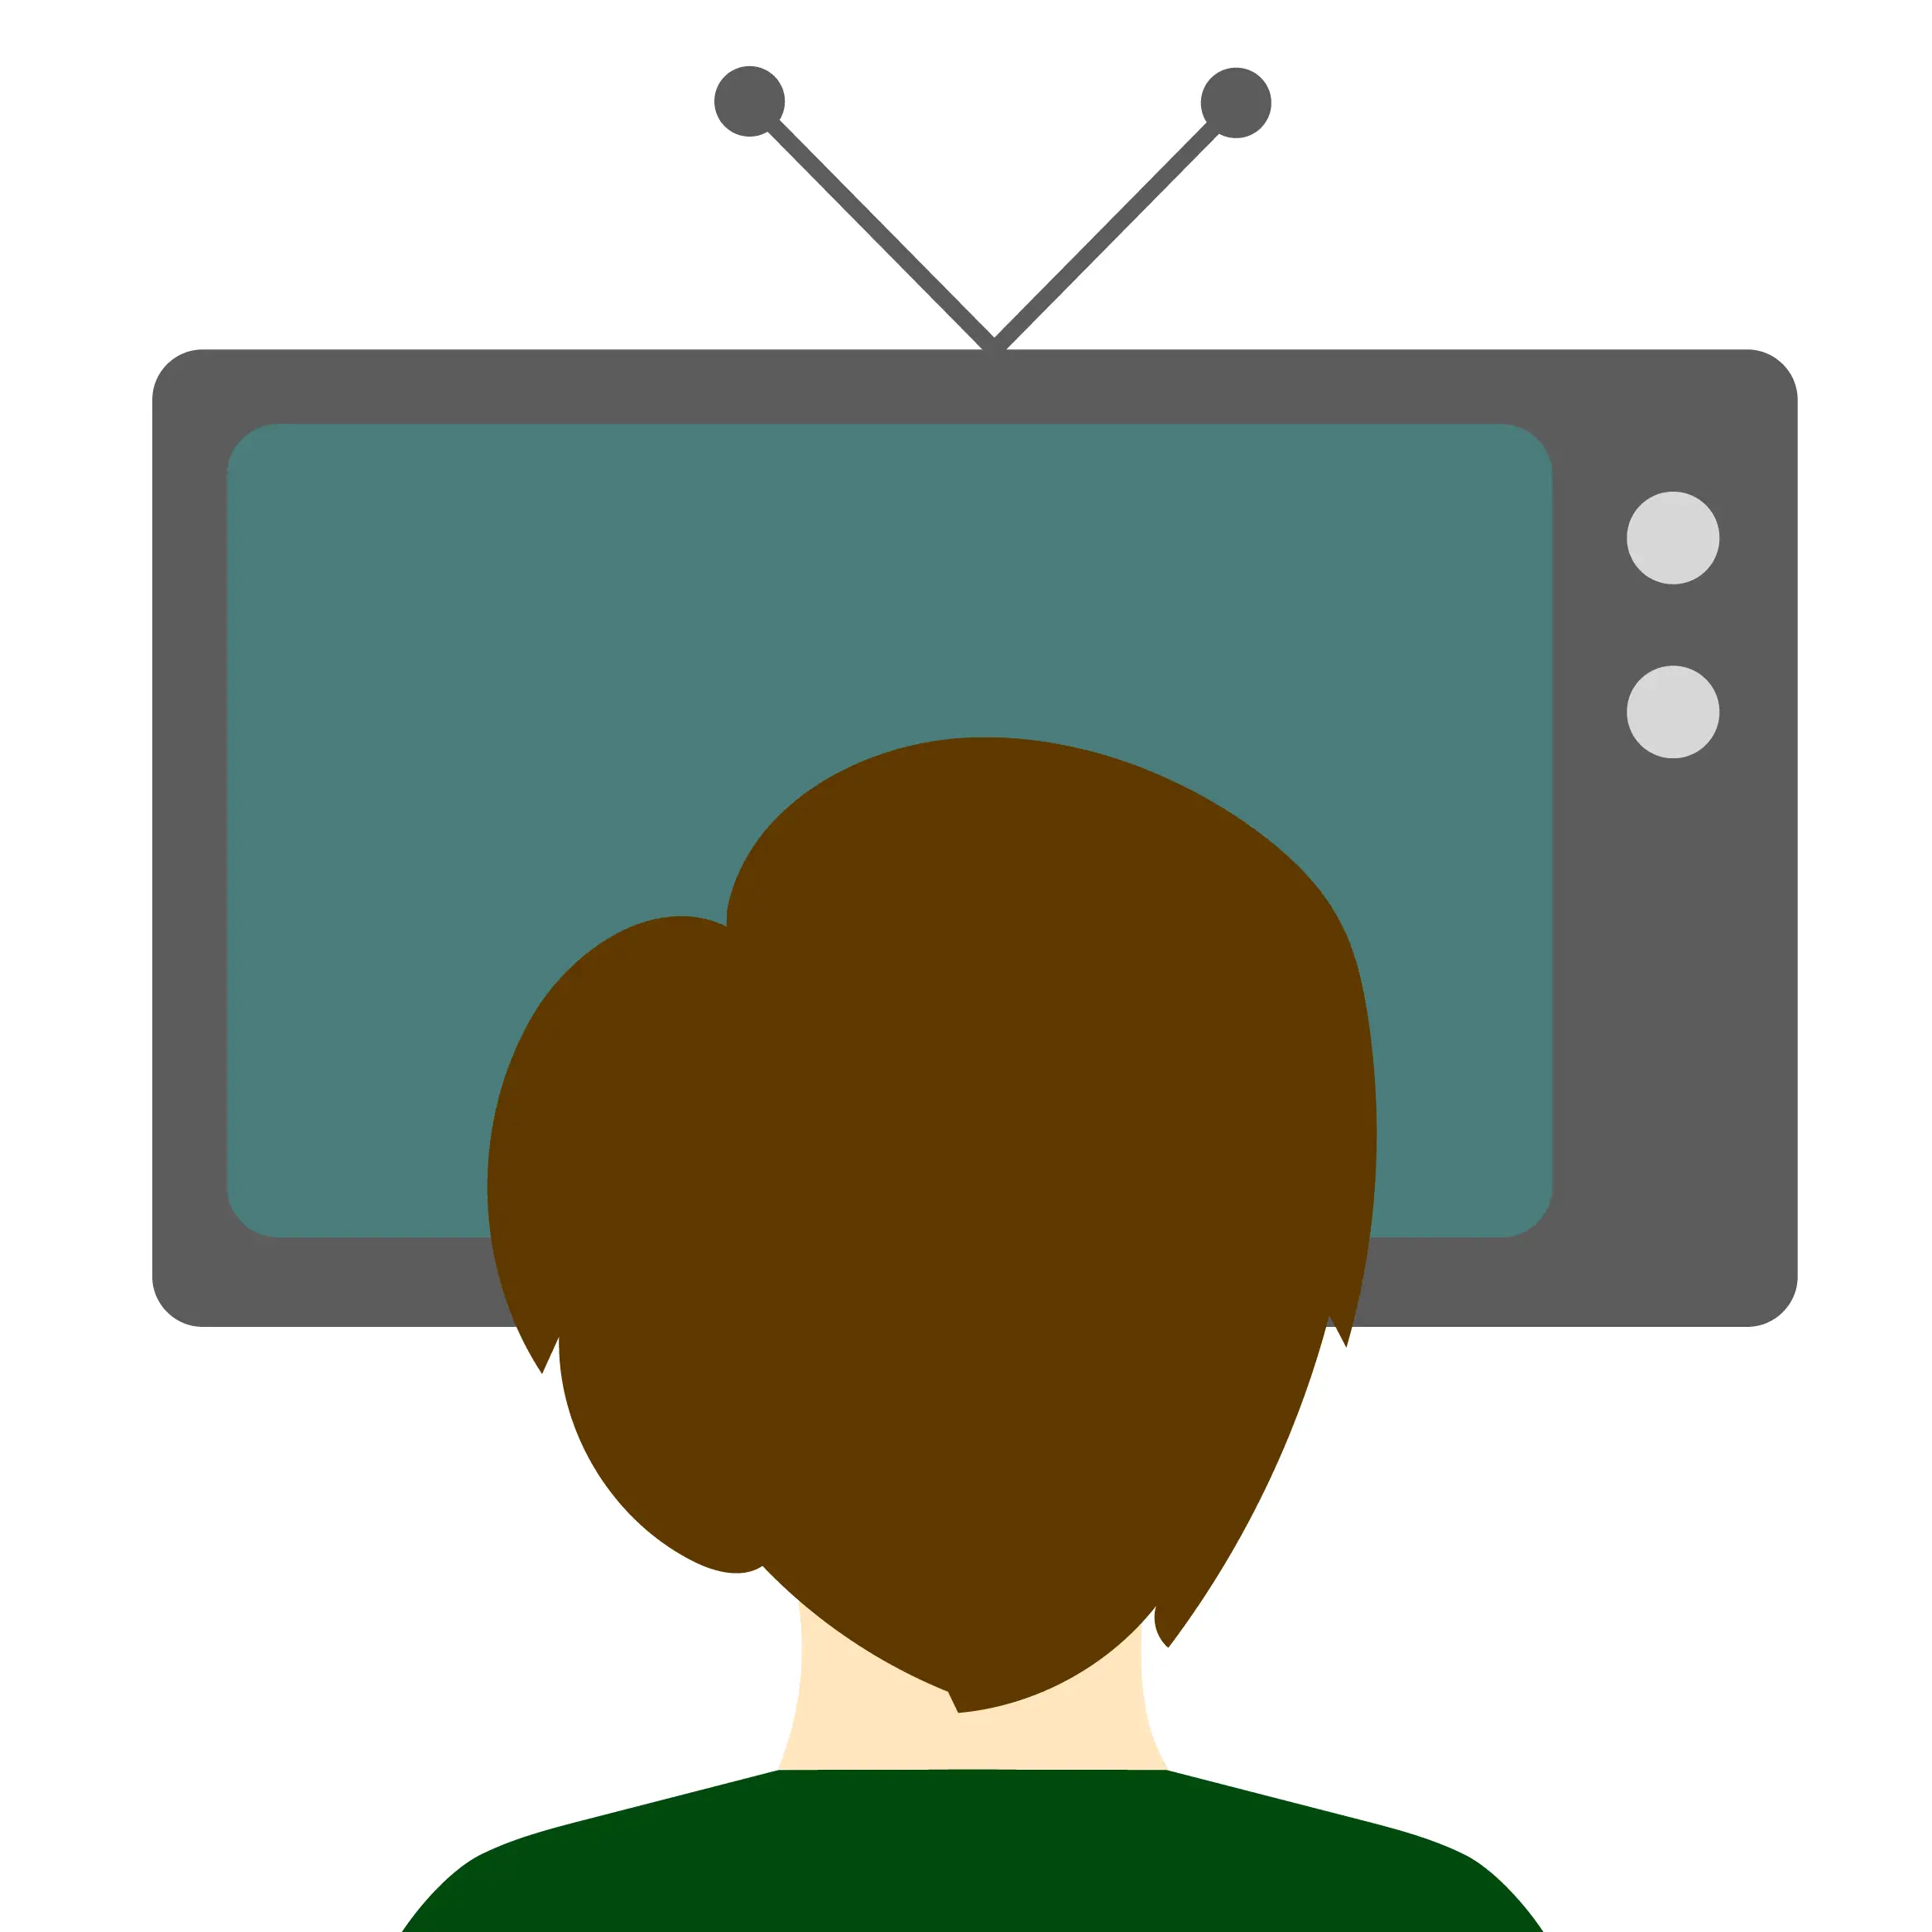 Watching television for leisure is an unhealthy sedentary behavior.